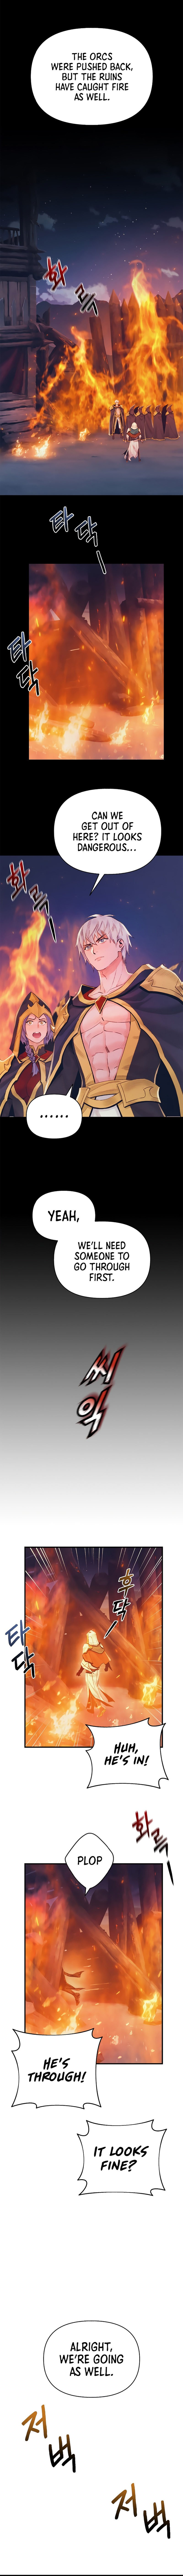 the-healing-priest-of-the-sun-chap-32-5